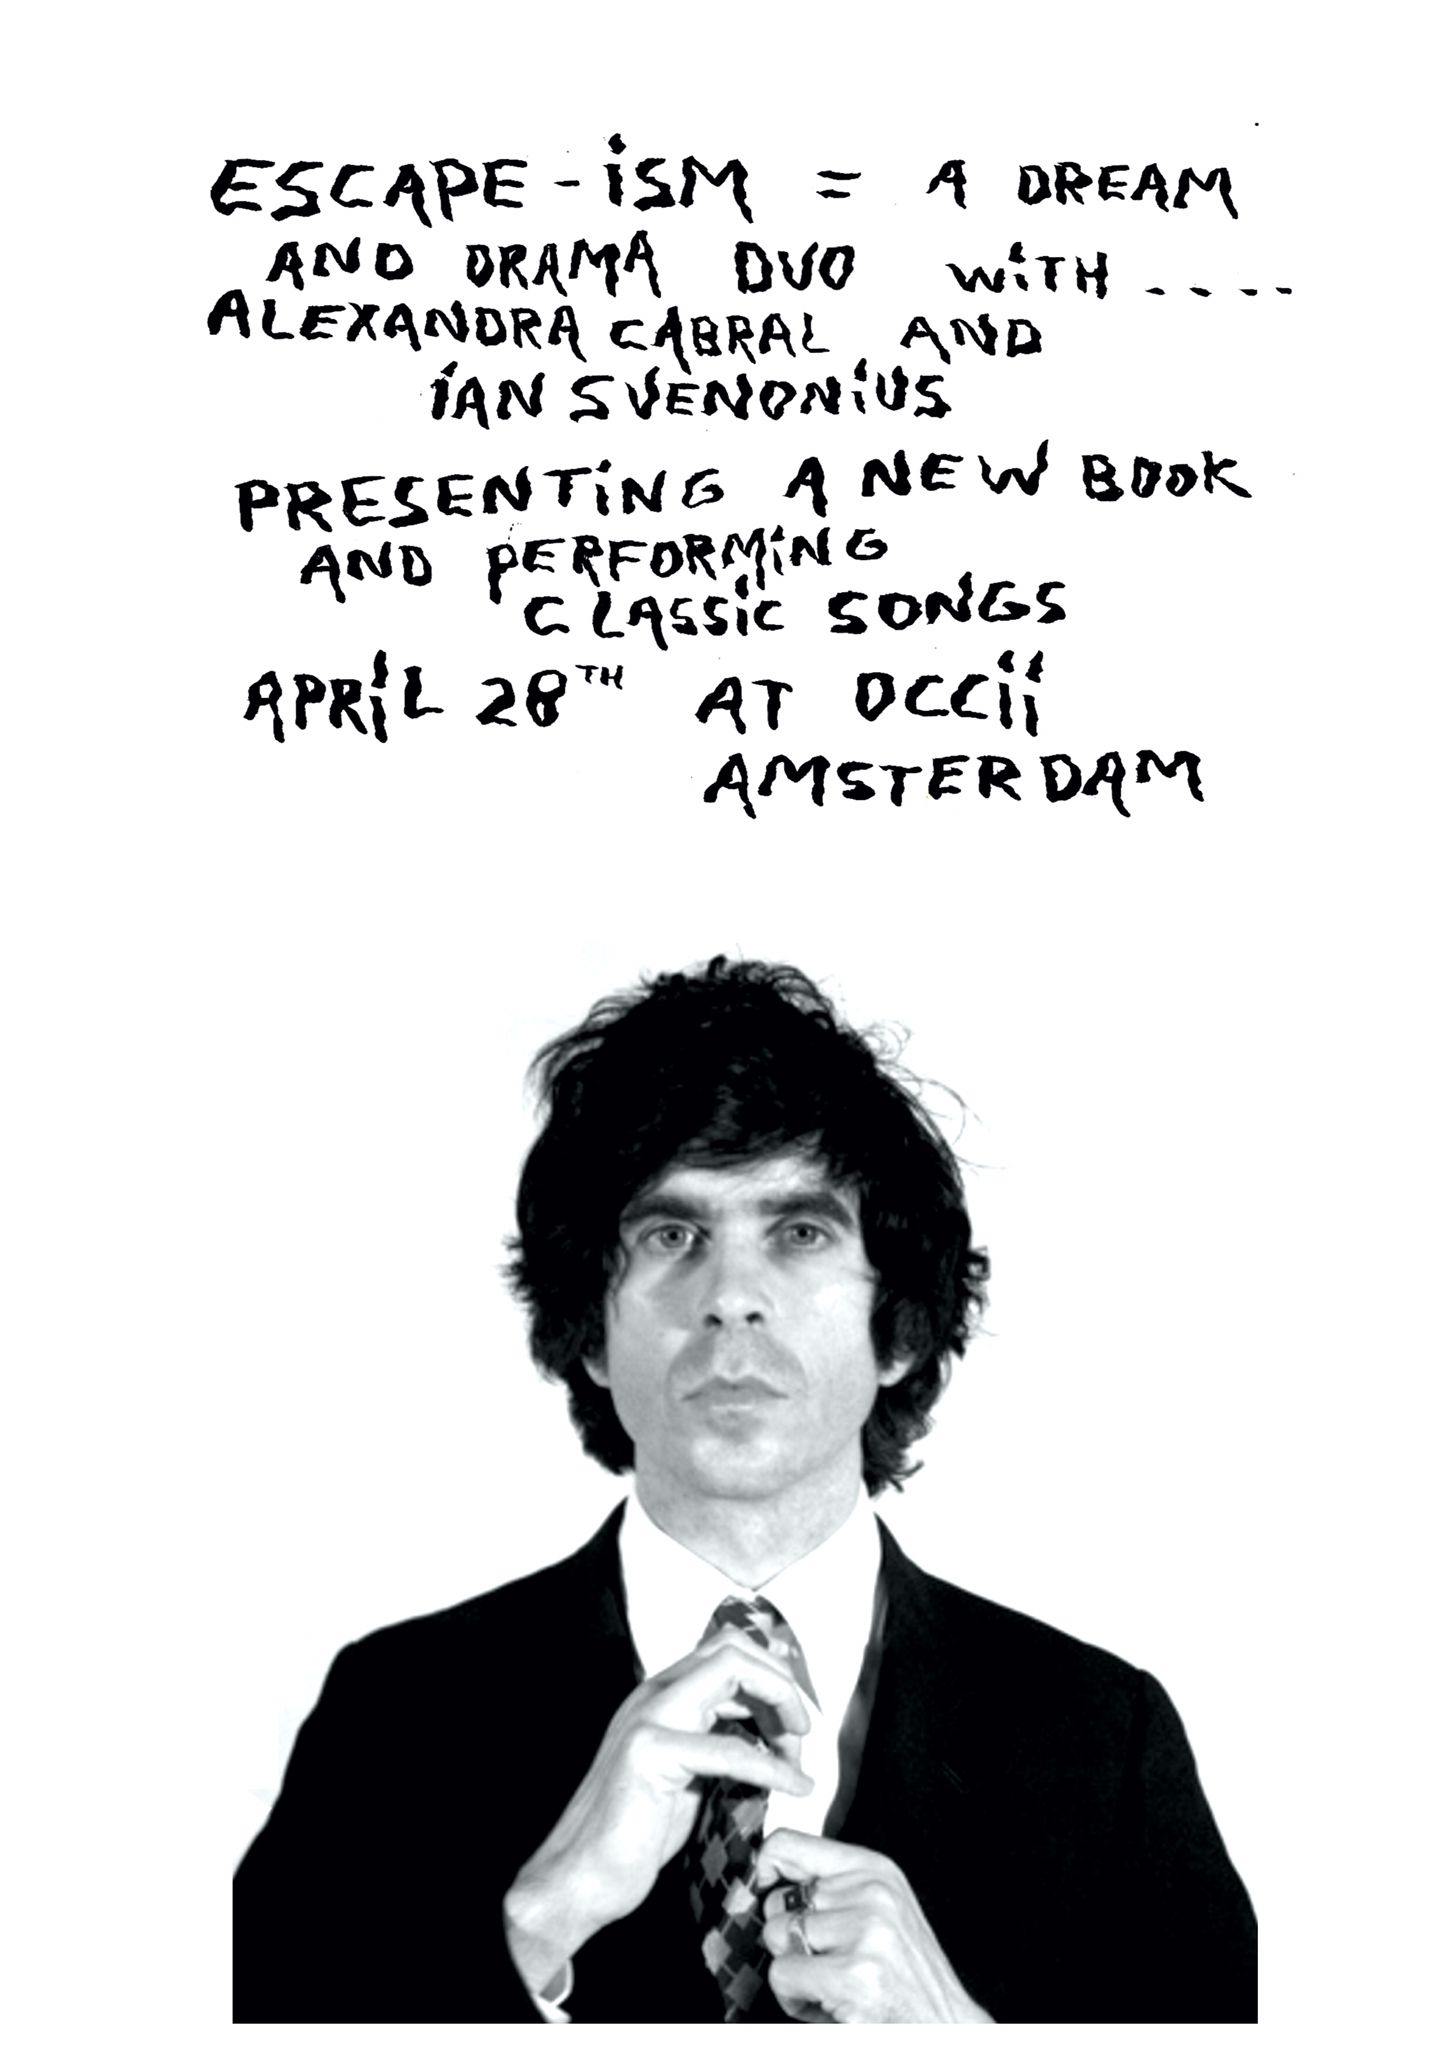 Against the Written Word; A Book Launch by IAN SVENONiUS + ESCAPE-ISM (US)